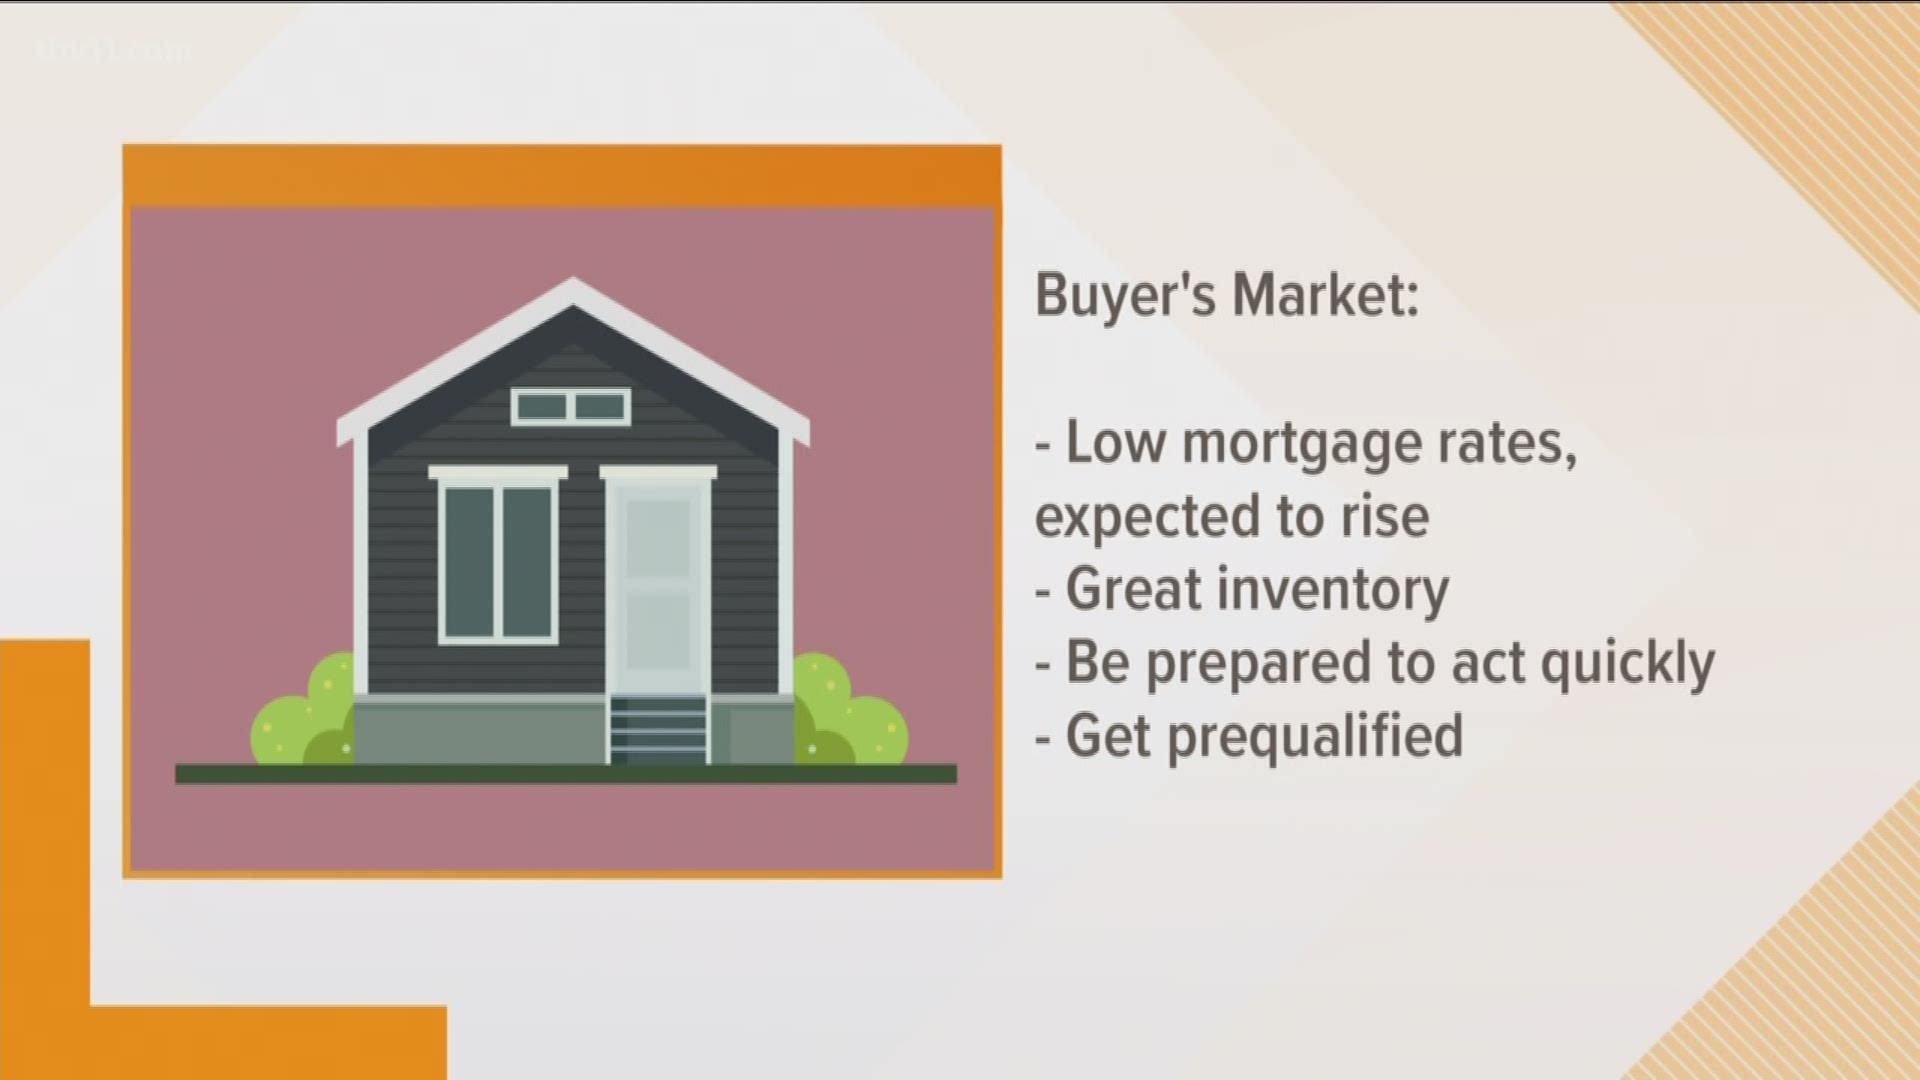 Little Rock Mortgage gives us some advice on how to buy a home in what is known as a buyer's market.